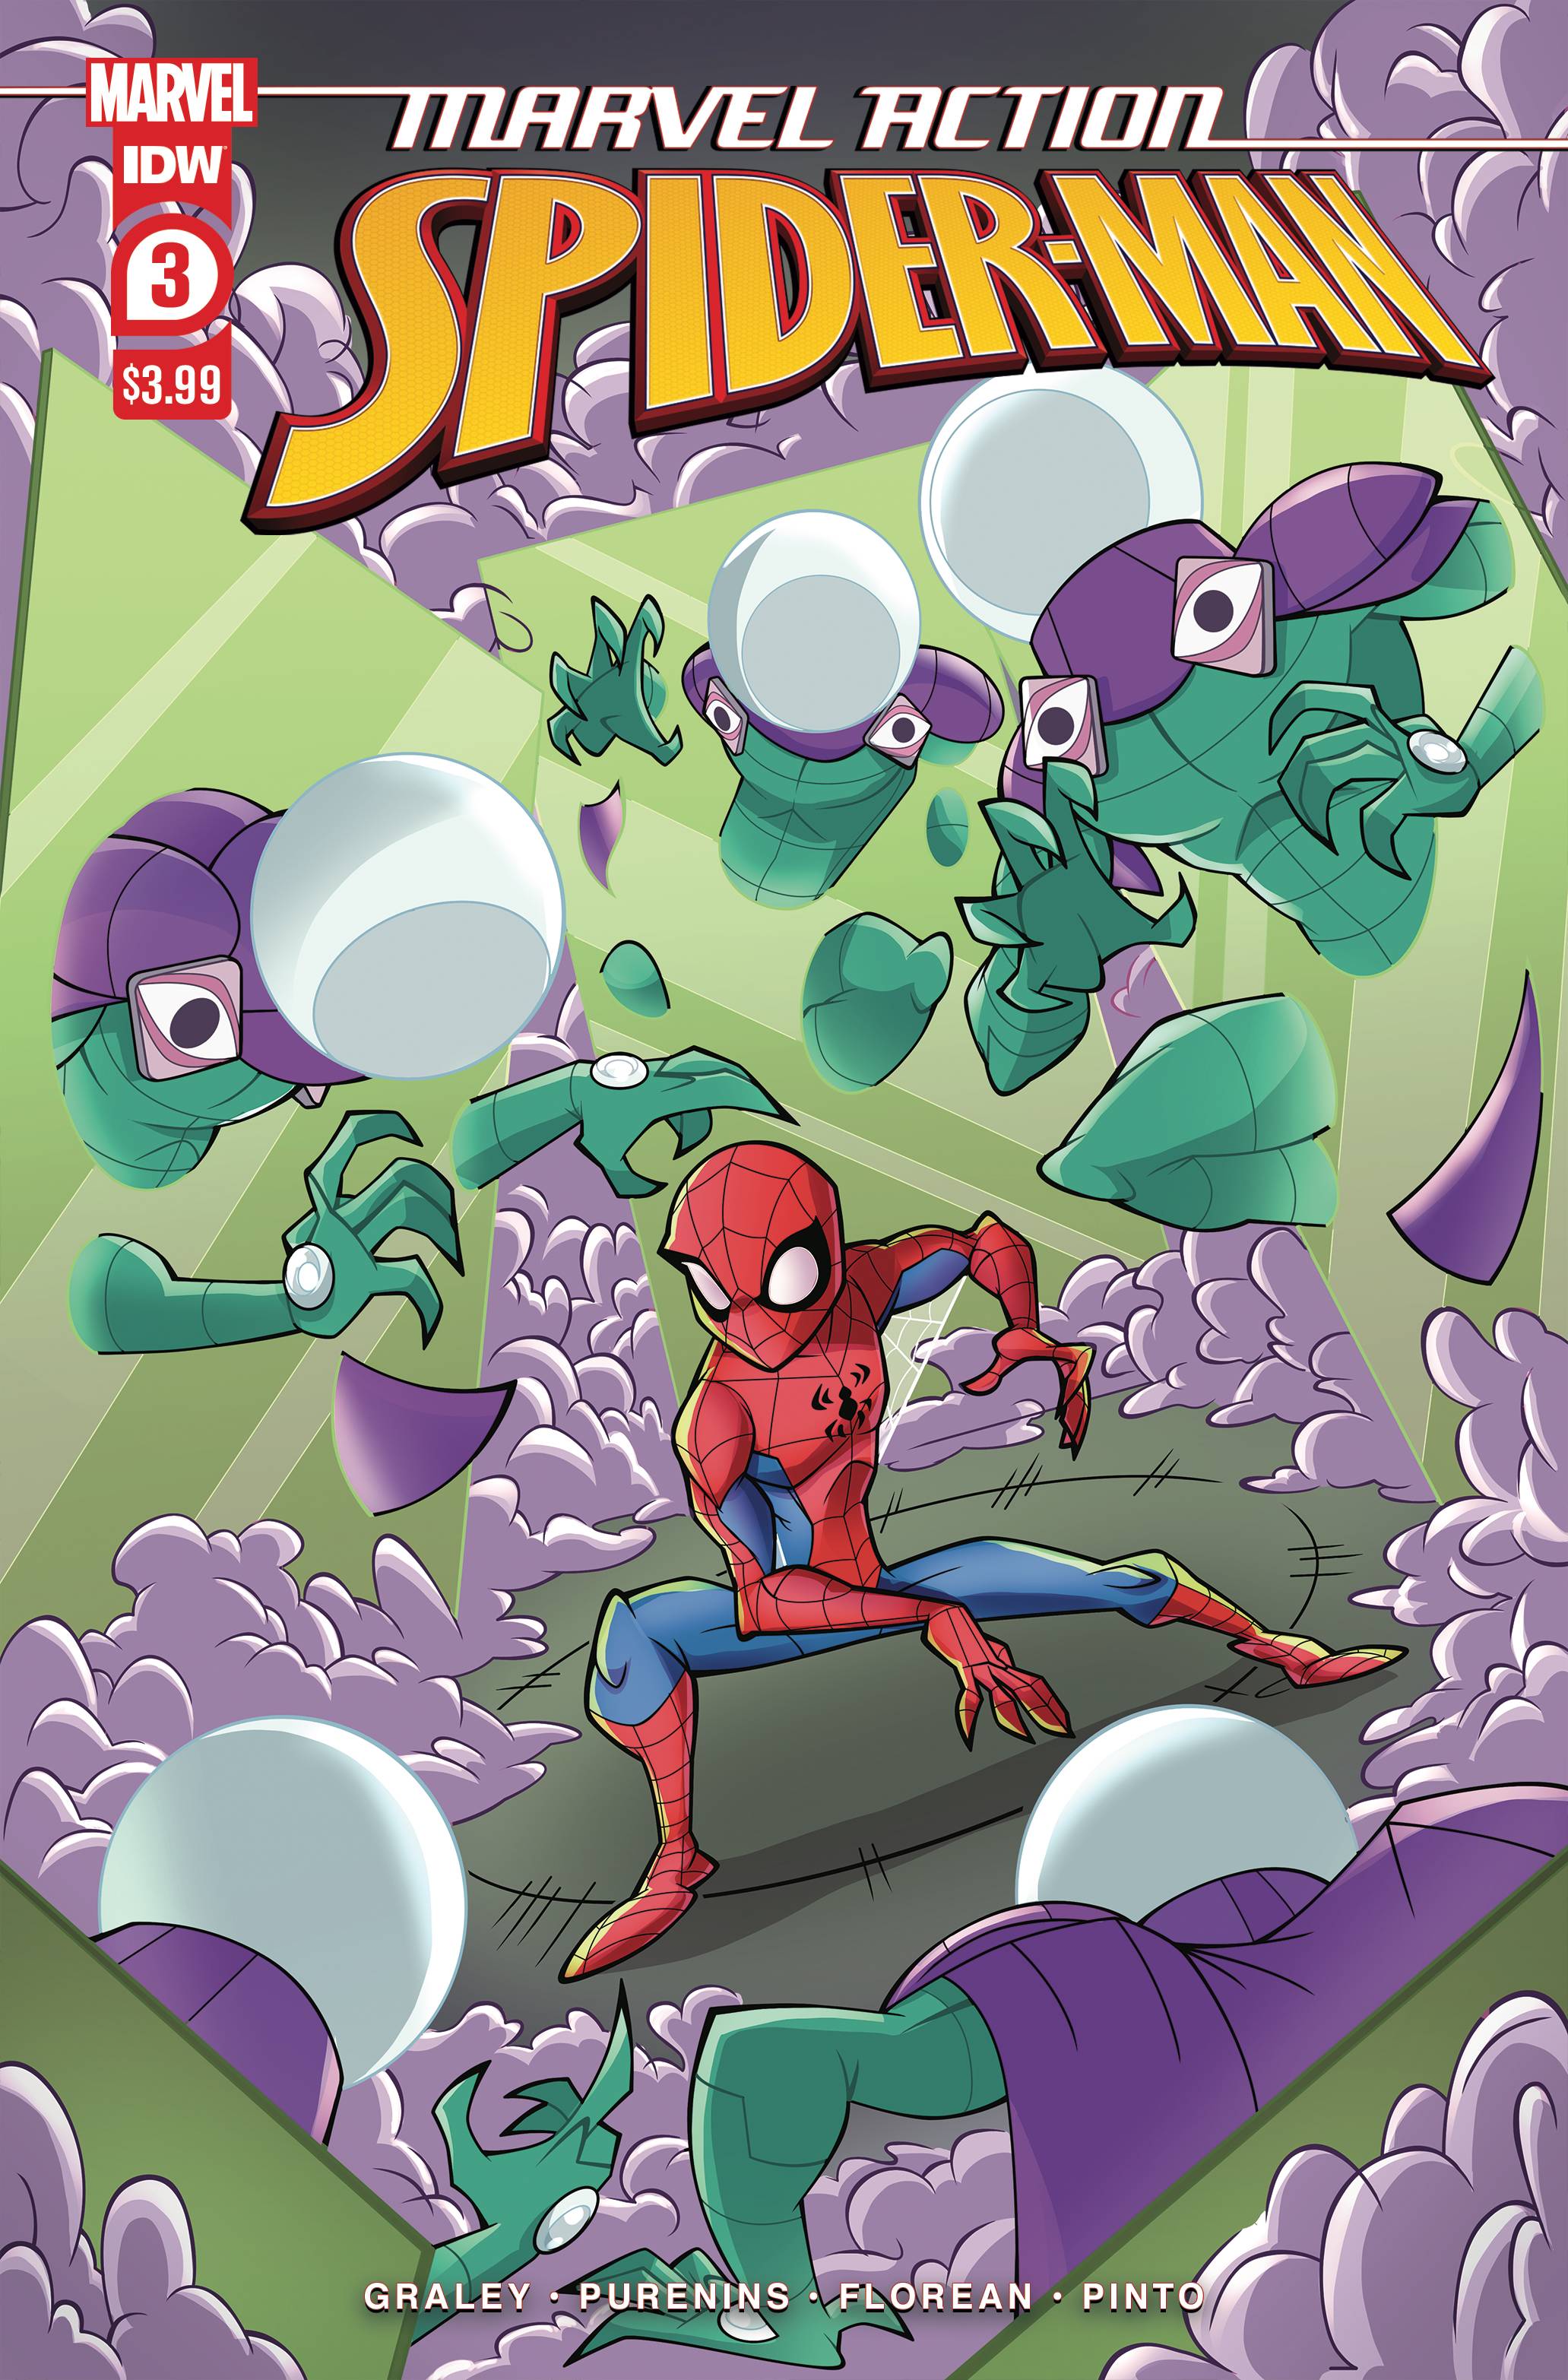 MARVEL ACTION SPIDER-MAN #3 | Game Master's Emporium (The New GME)